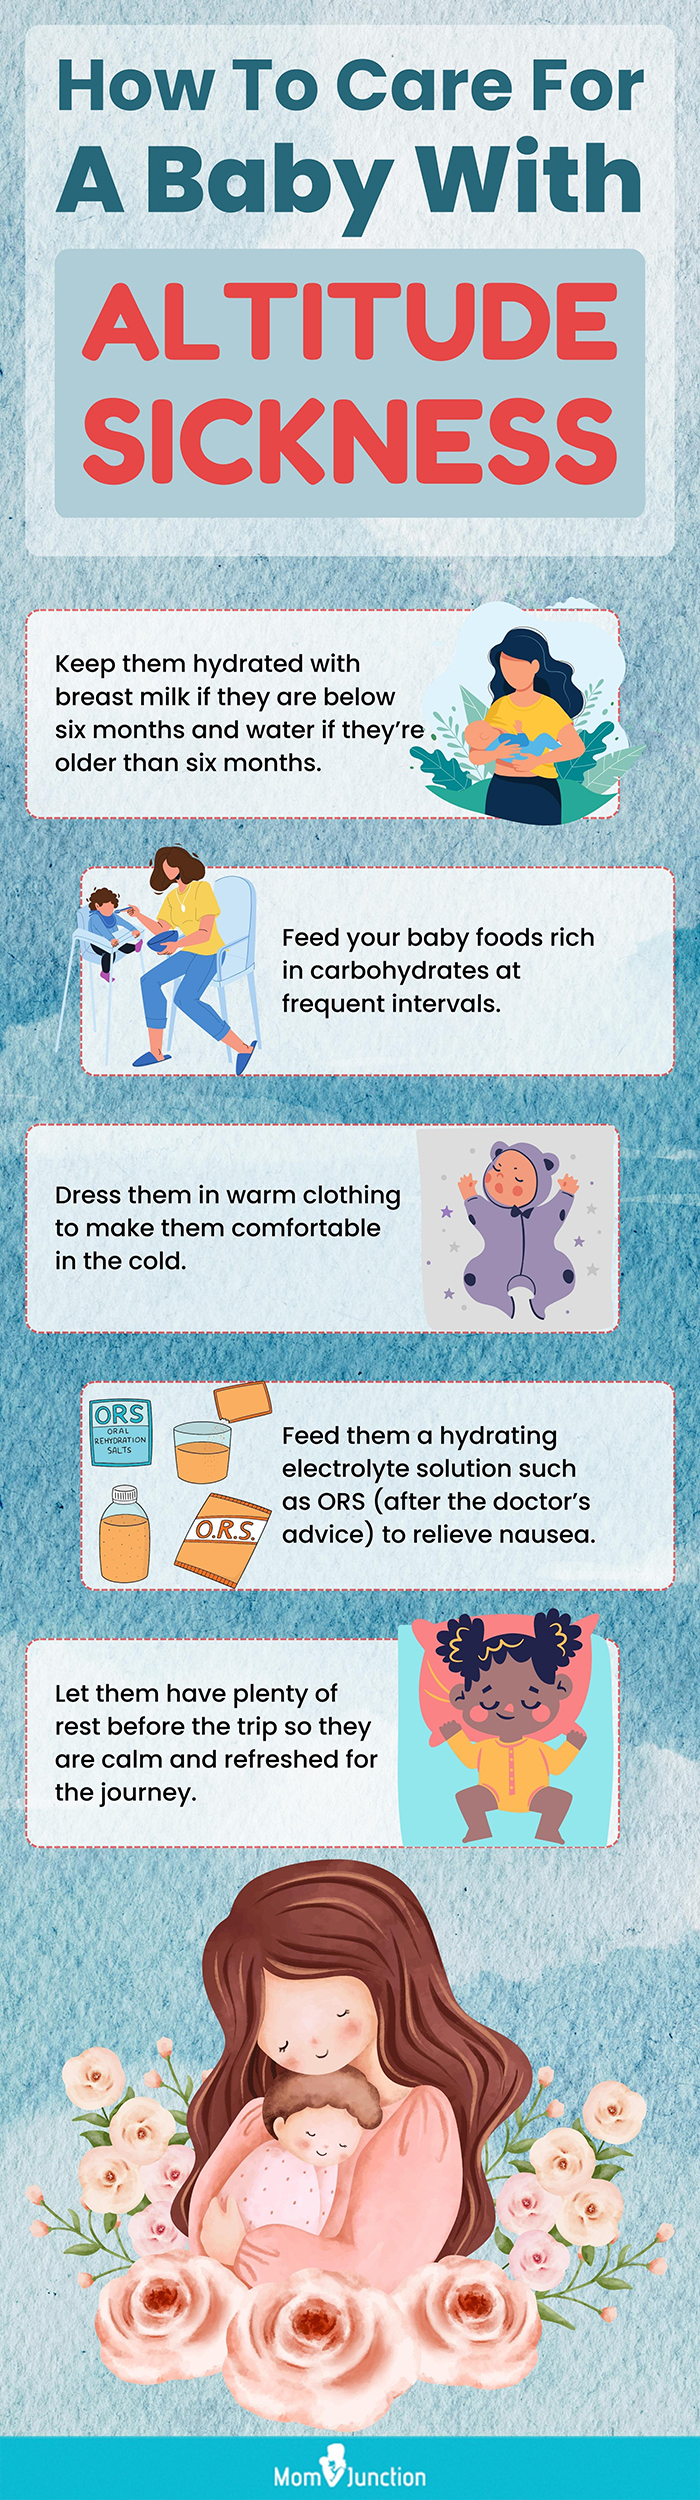 how to care for a baby with altitude sickness (infographic)